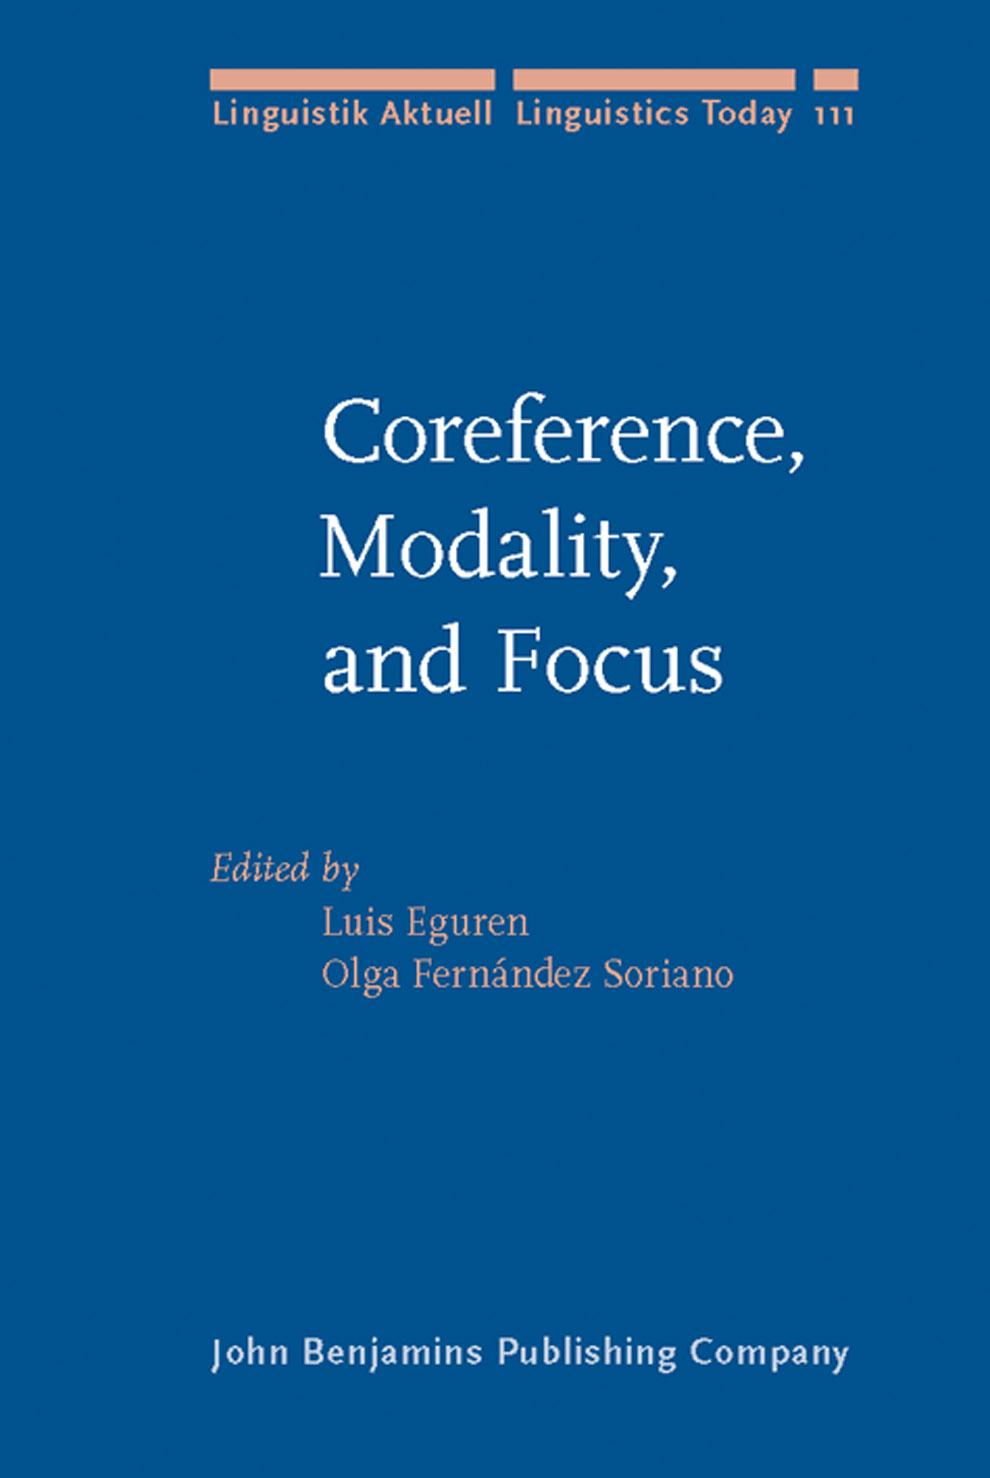 Coreference, Modality, and Focus: Studies on the Syntax-Semantics Interface